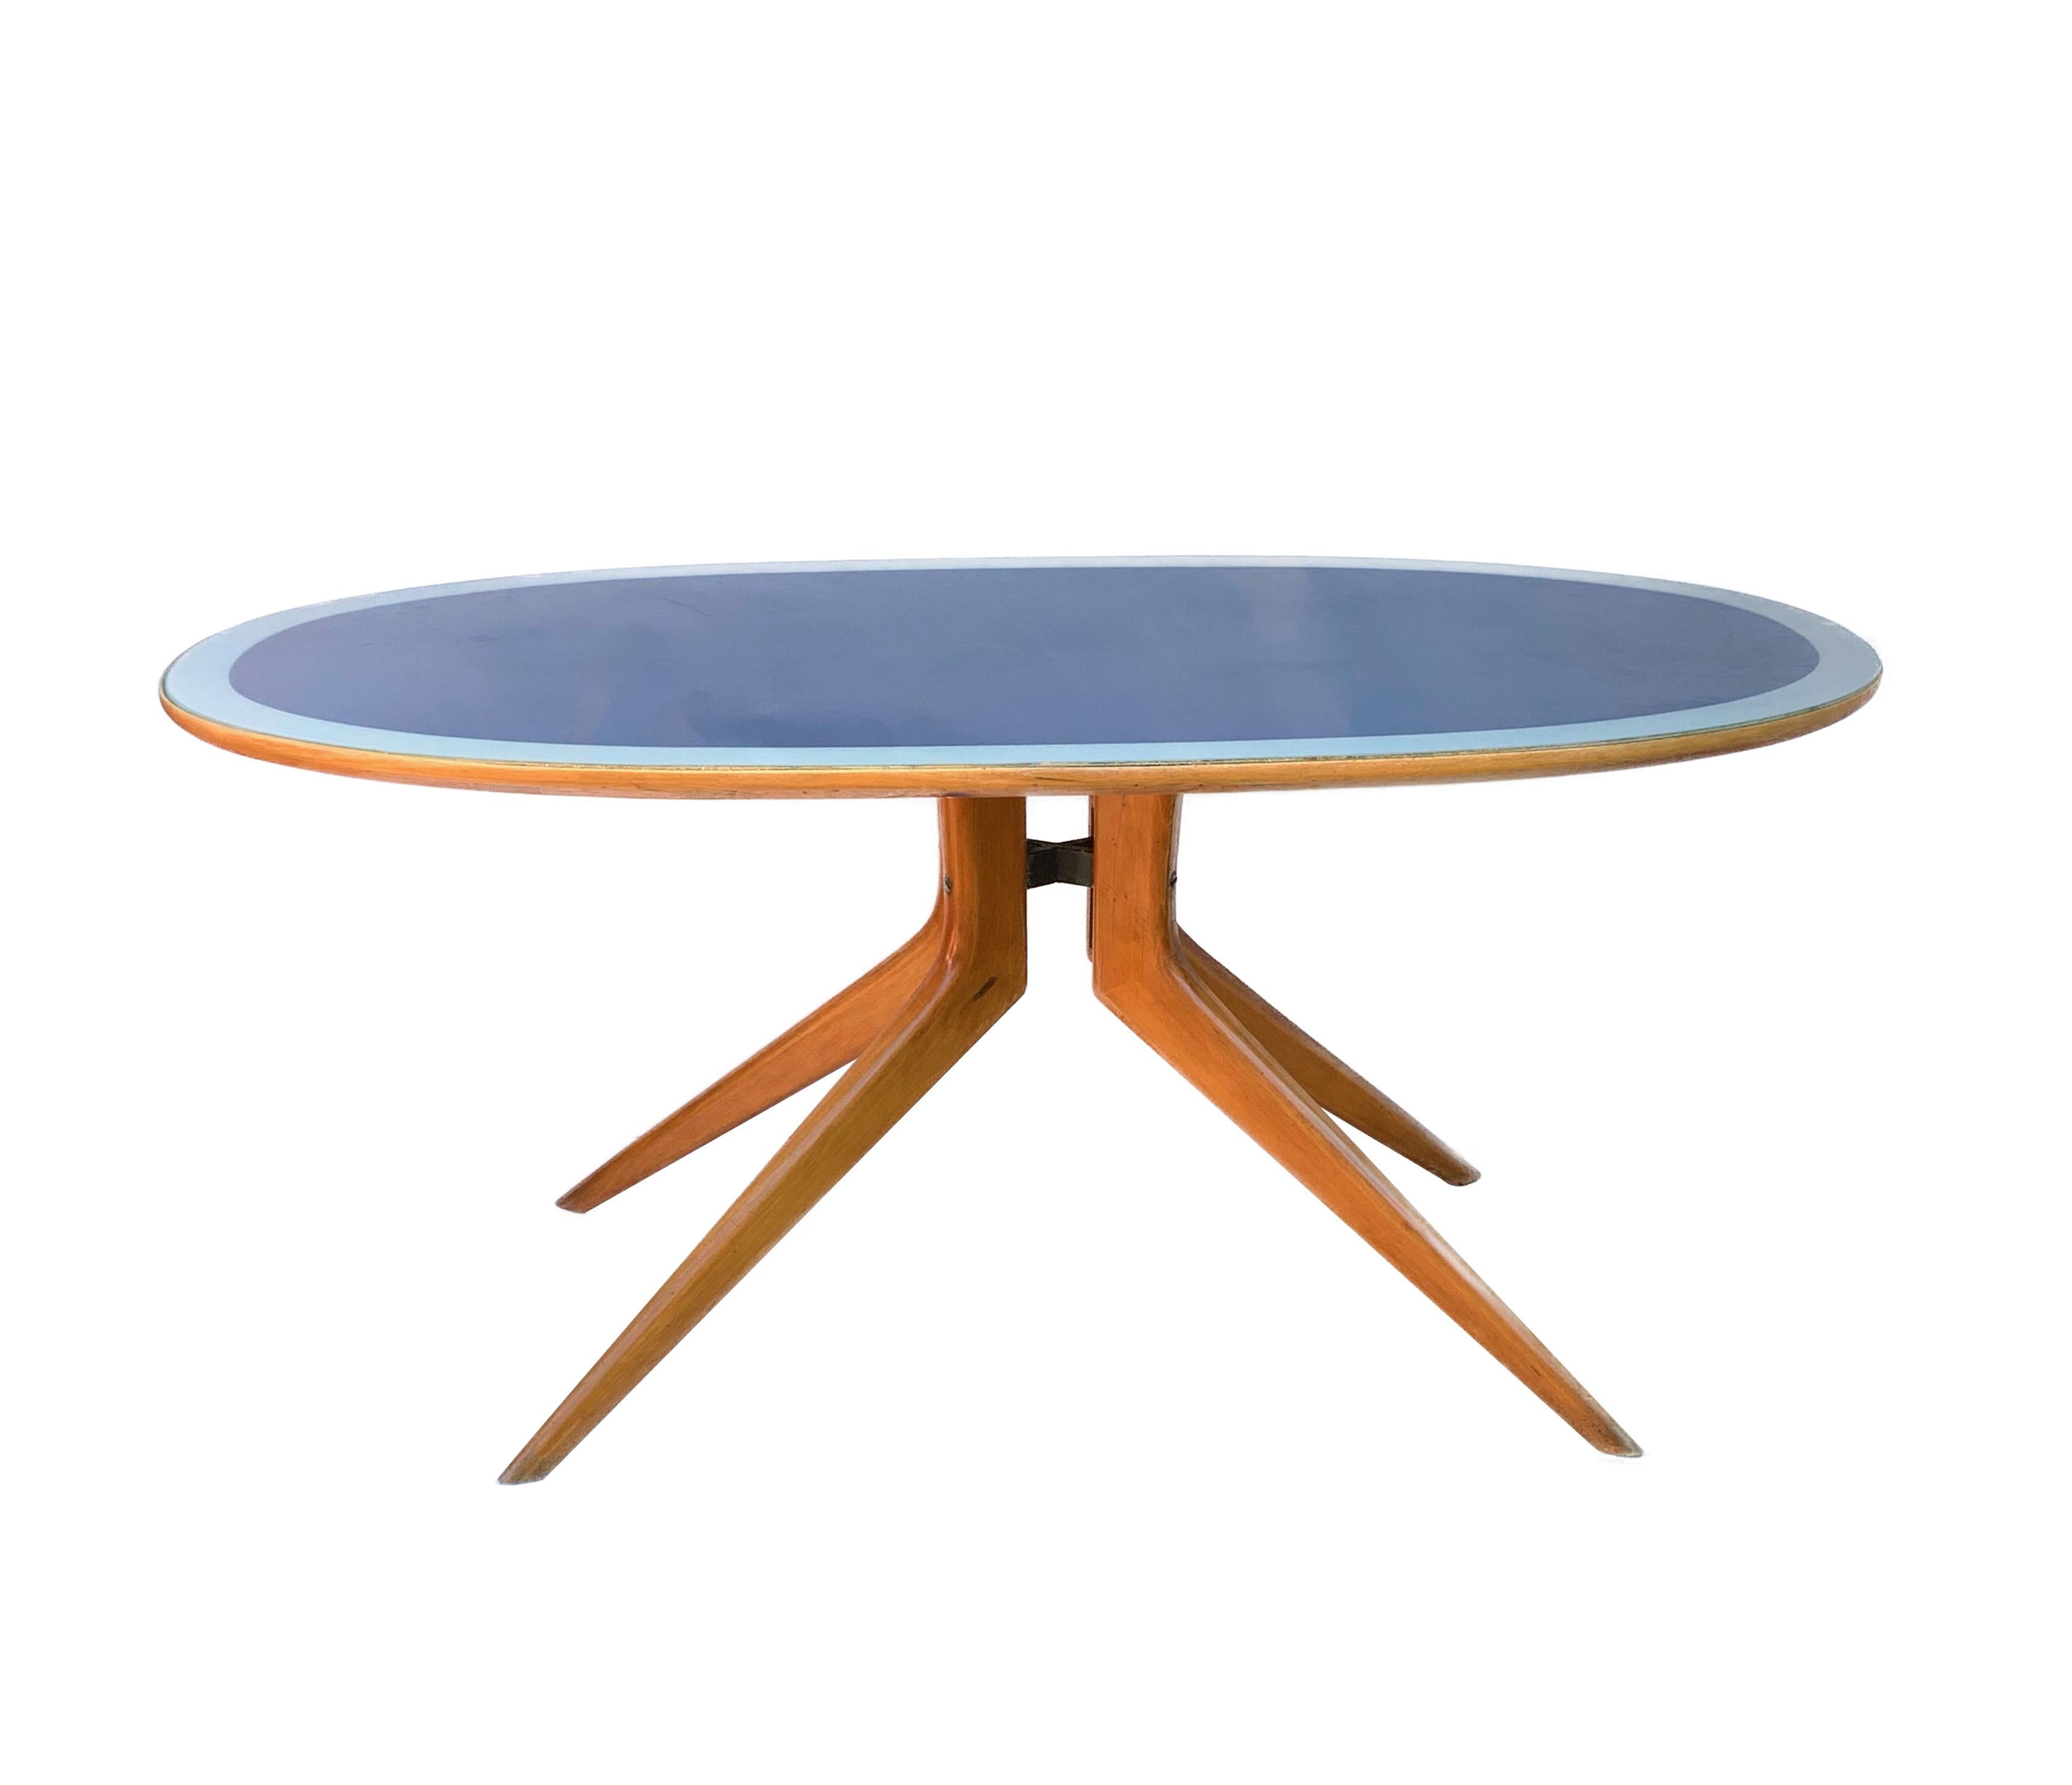 Mid-20th Century Ico Parisi, Italian Table Oval Wood, Printed Glass Top Blue and Grey, Italy 1953